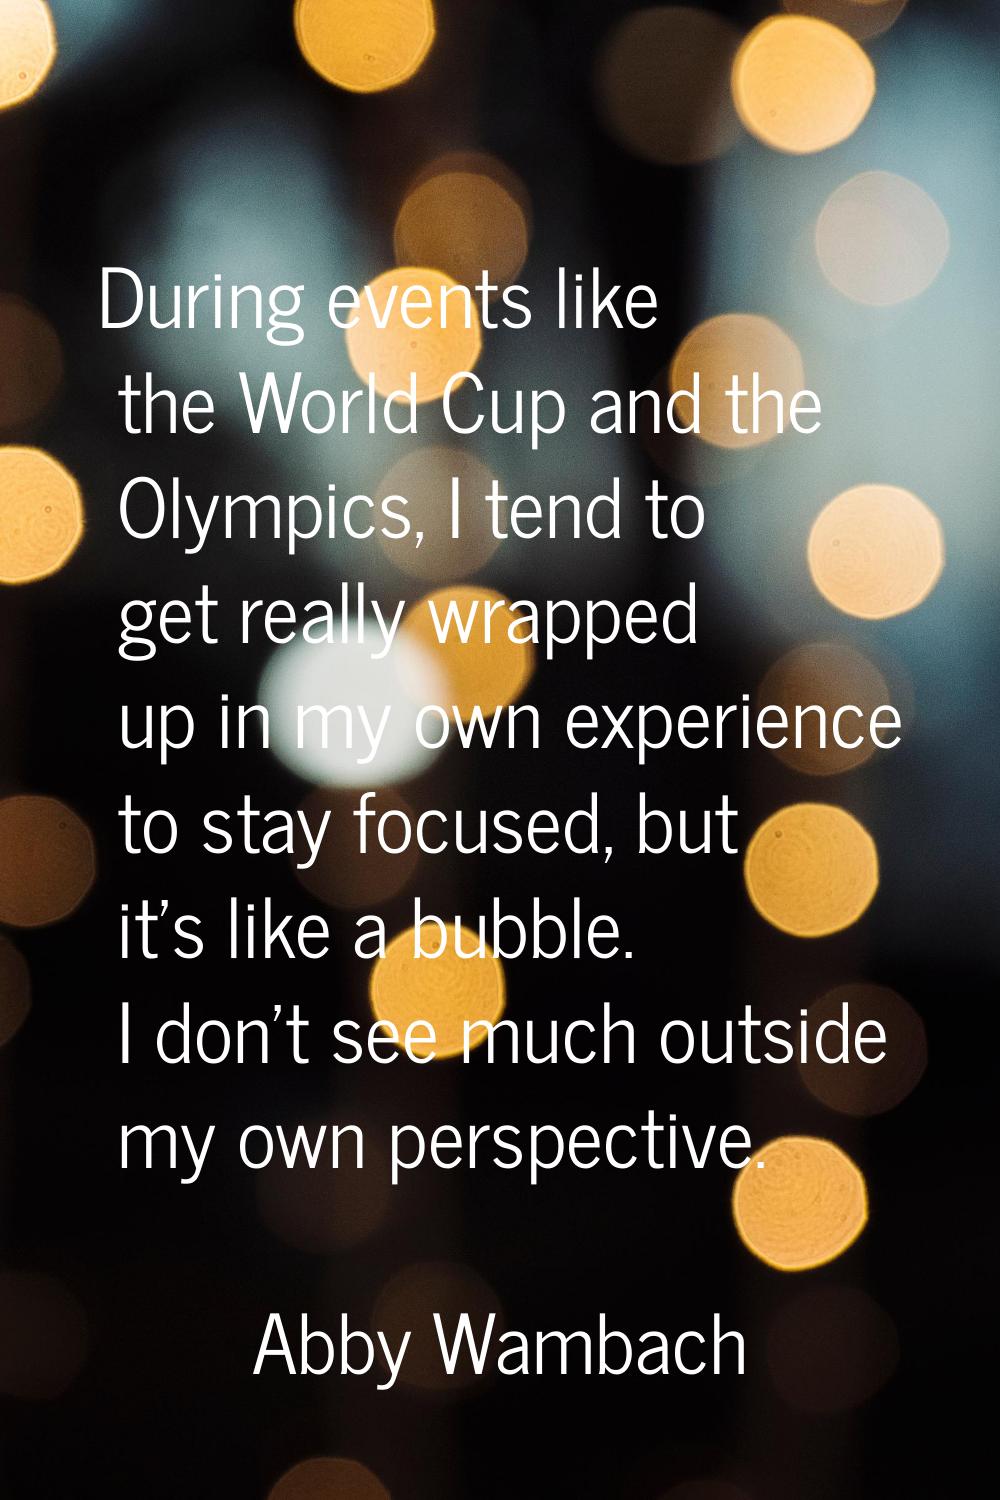 During events like the World Cup and the Olympics, I tend to get really wrapped up in my own experi